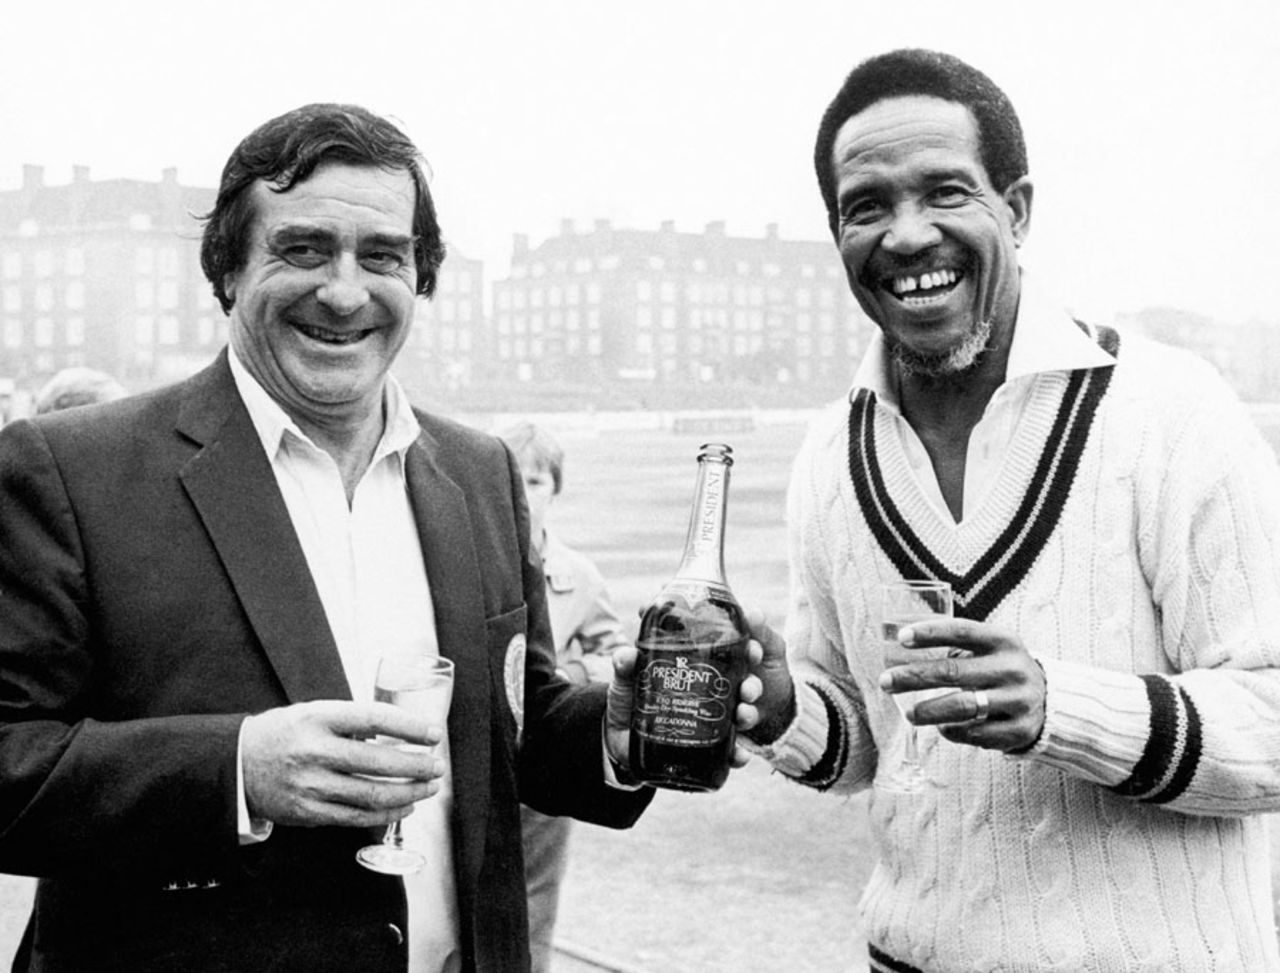 Fred Trueman and Garry Sobers share a drink, The Oval, September 19, 1982